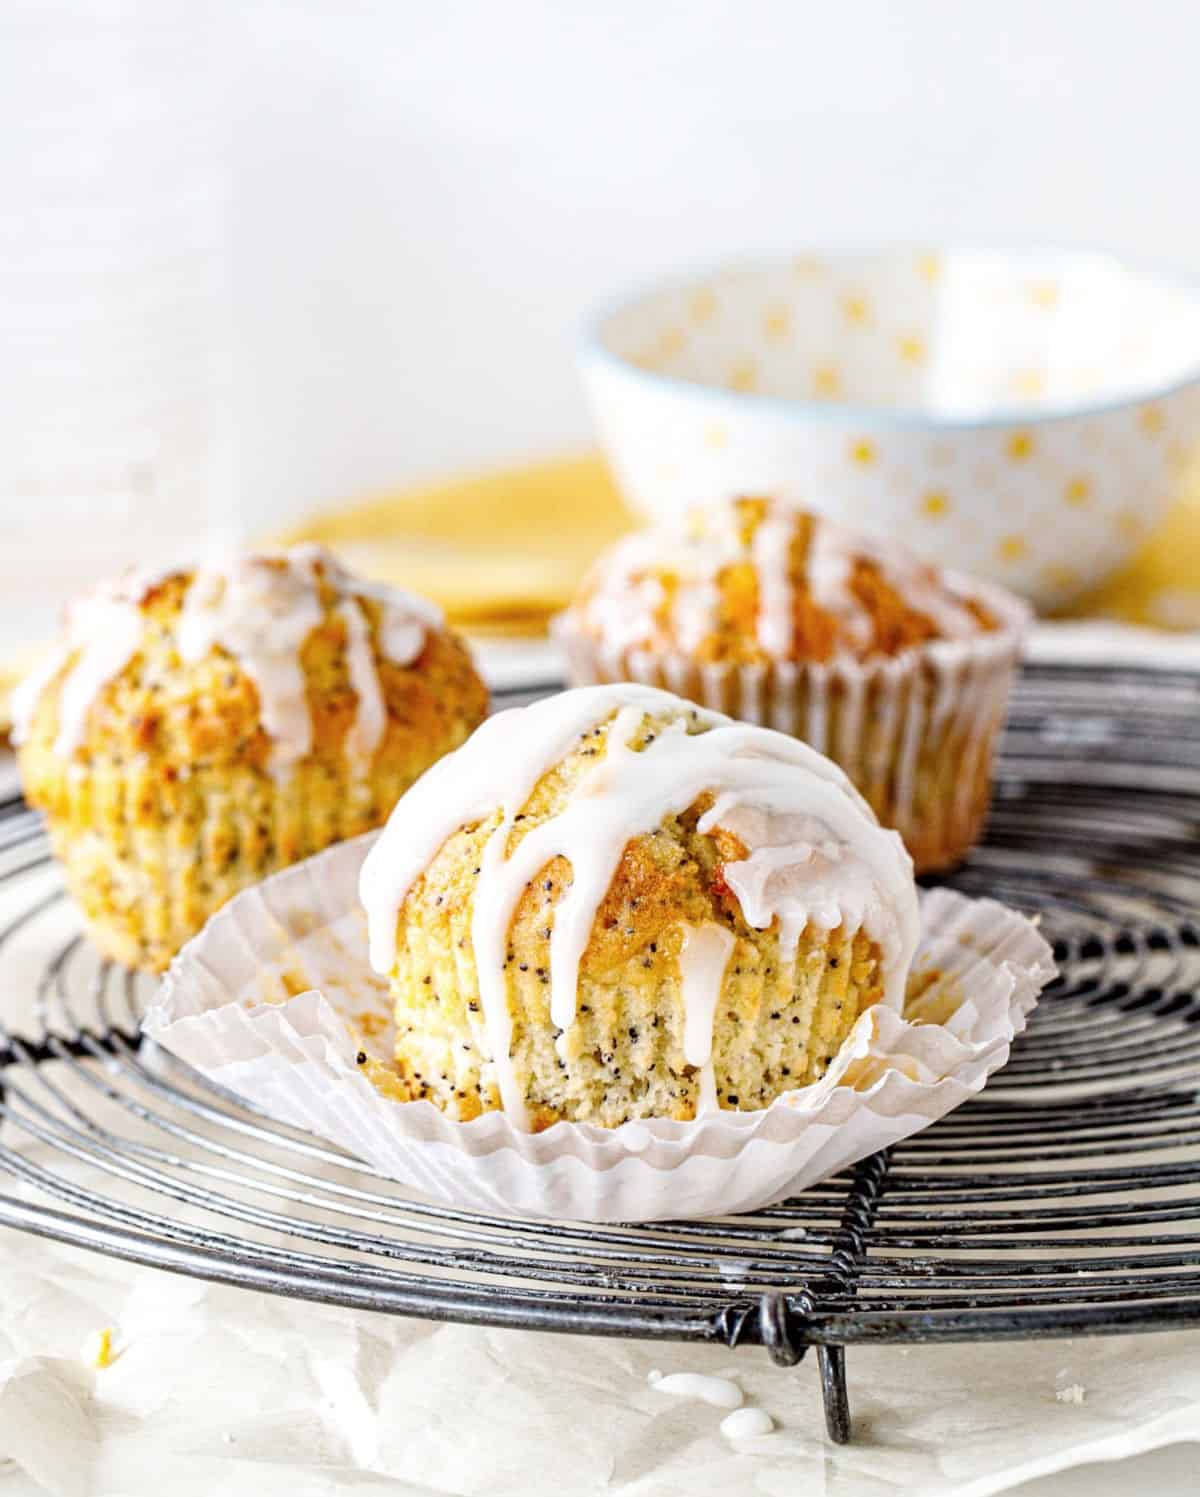 Three glazed lemon poppy muffins on a metal round cooling rack; bowl in the white background.